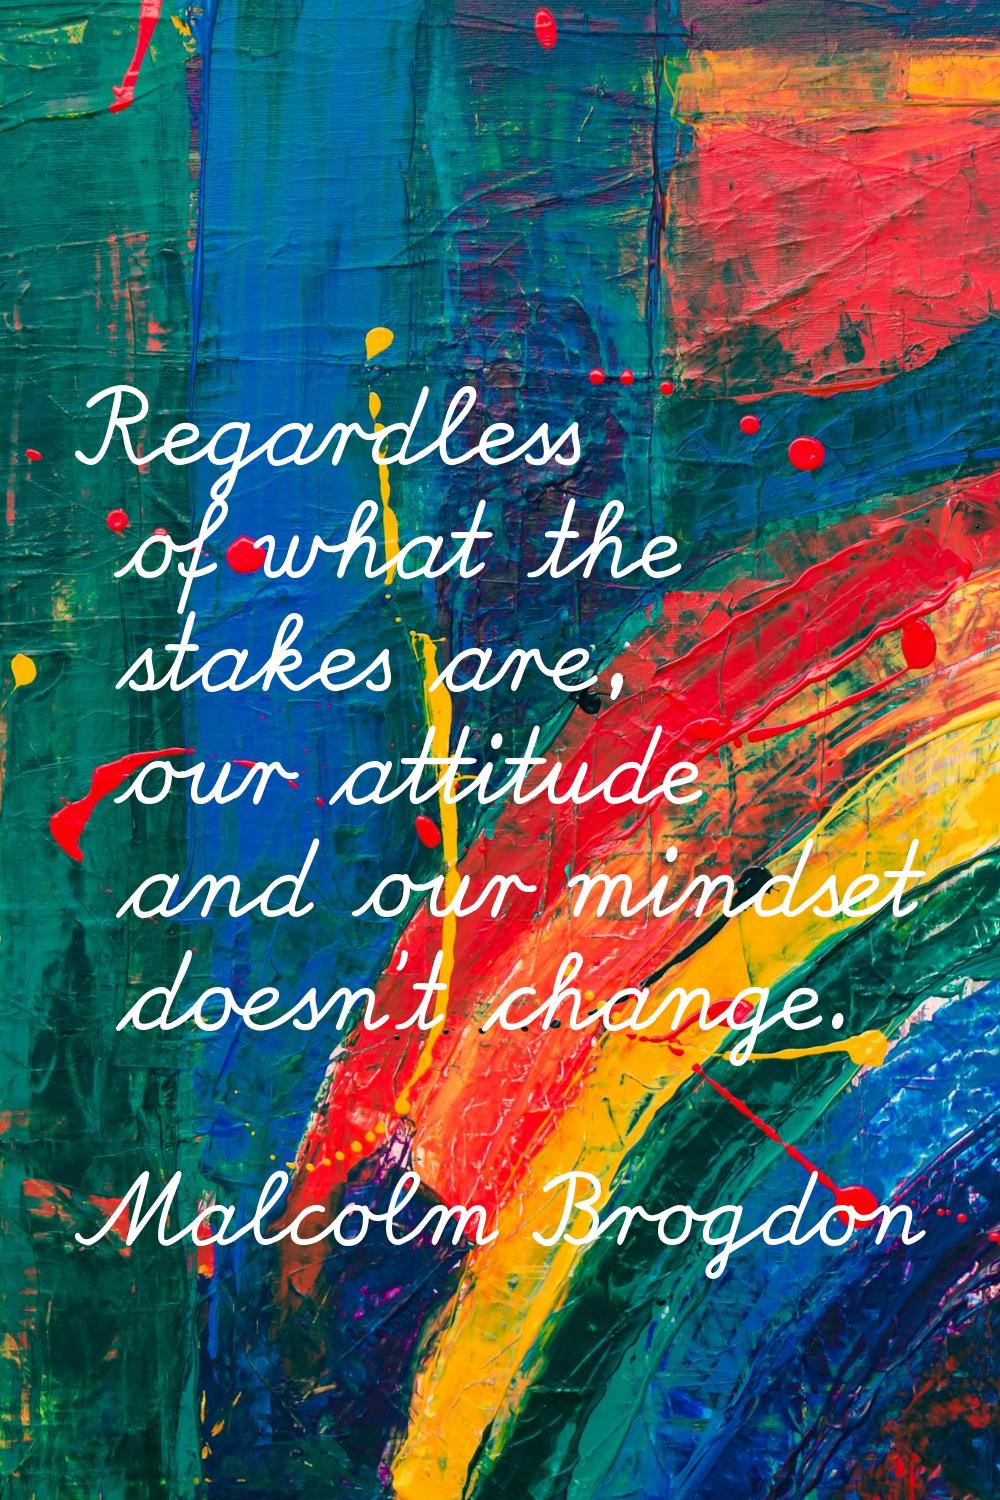 Regardless of what the stakes are, our attitude and our mindset doesn't change.